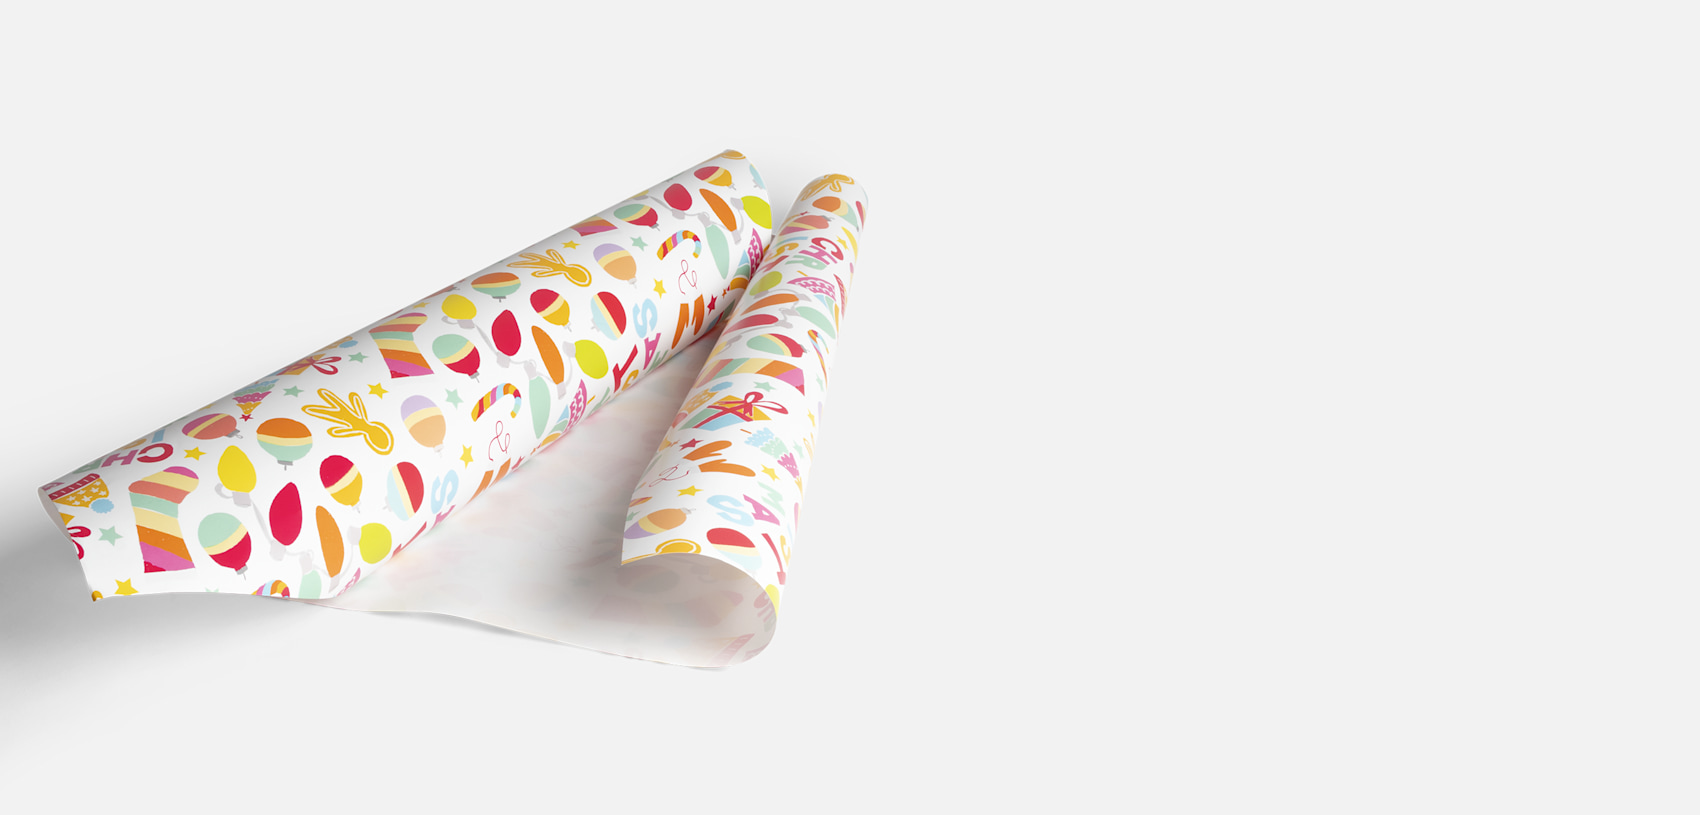 Larger version: Wrapping Papers